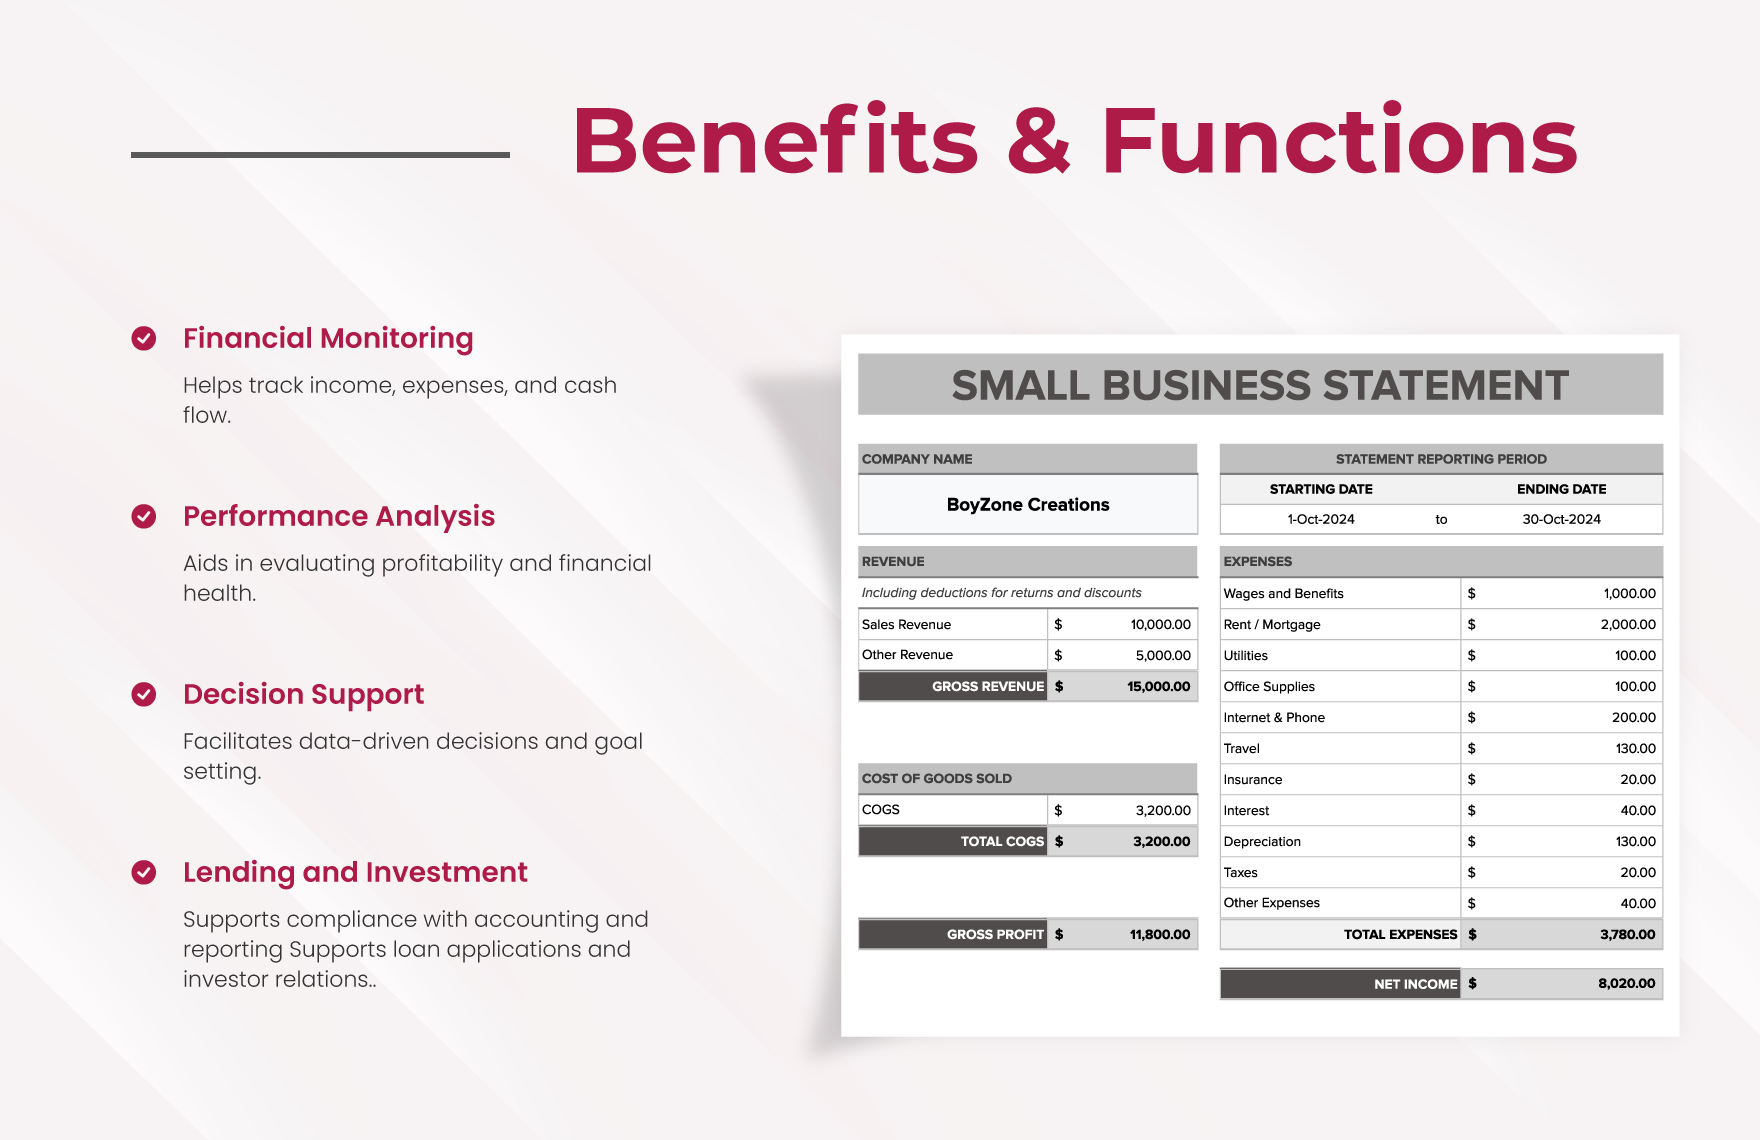 Small Business Statement Template